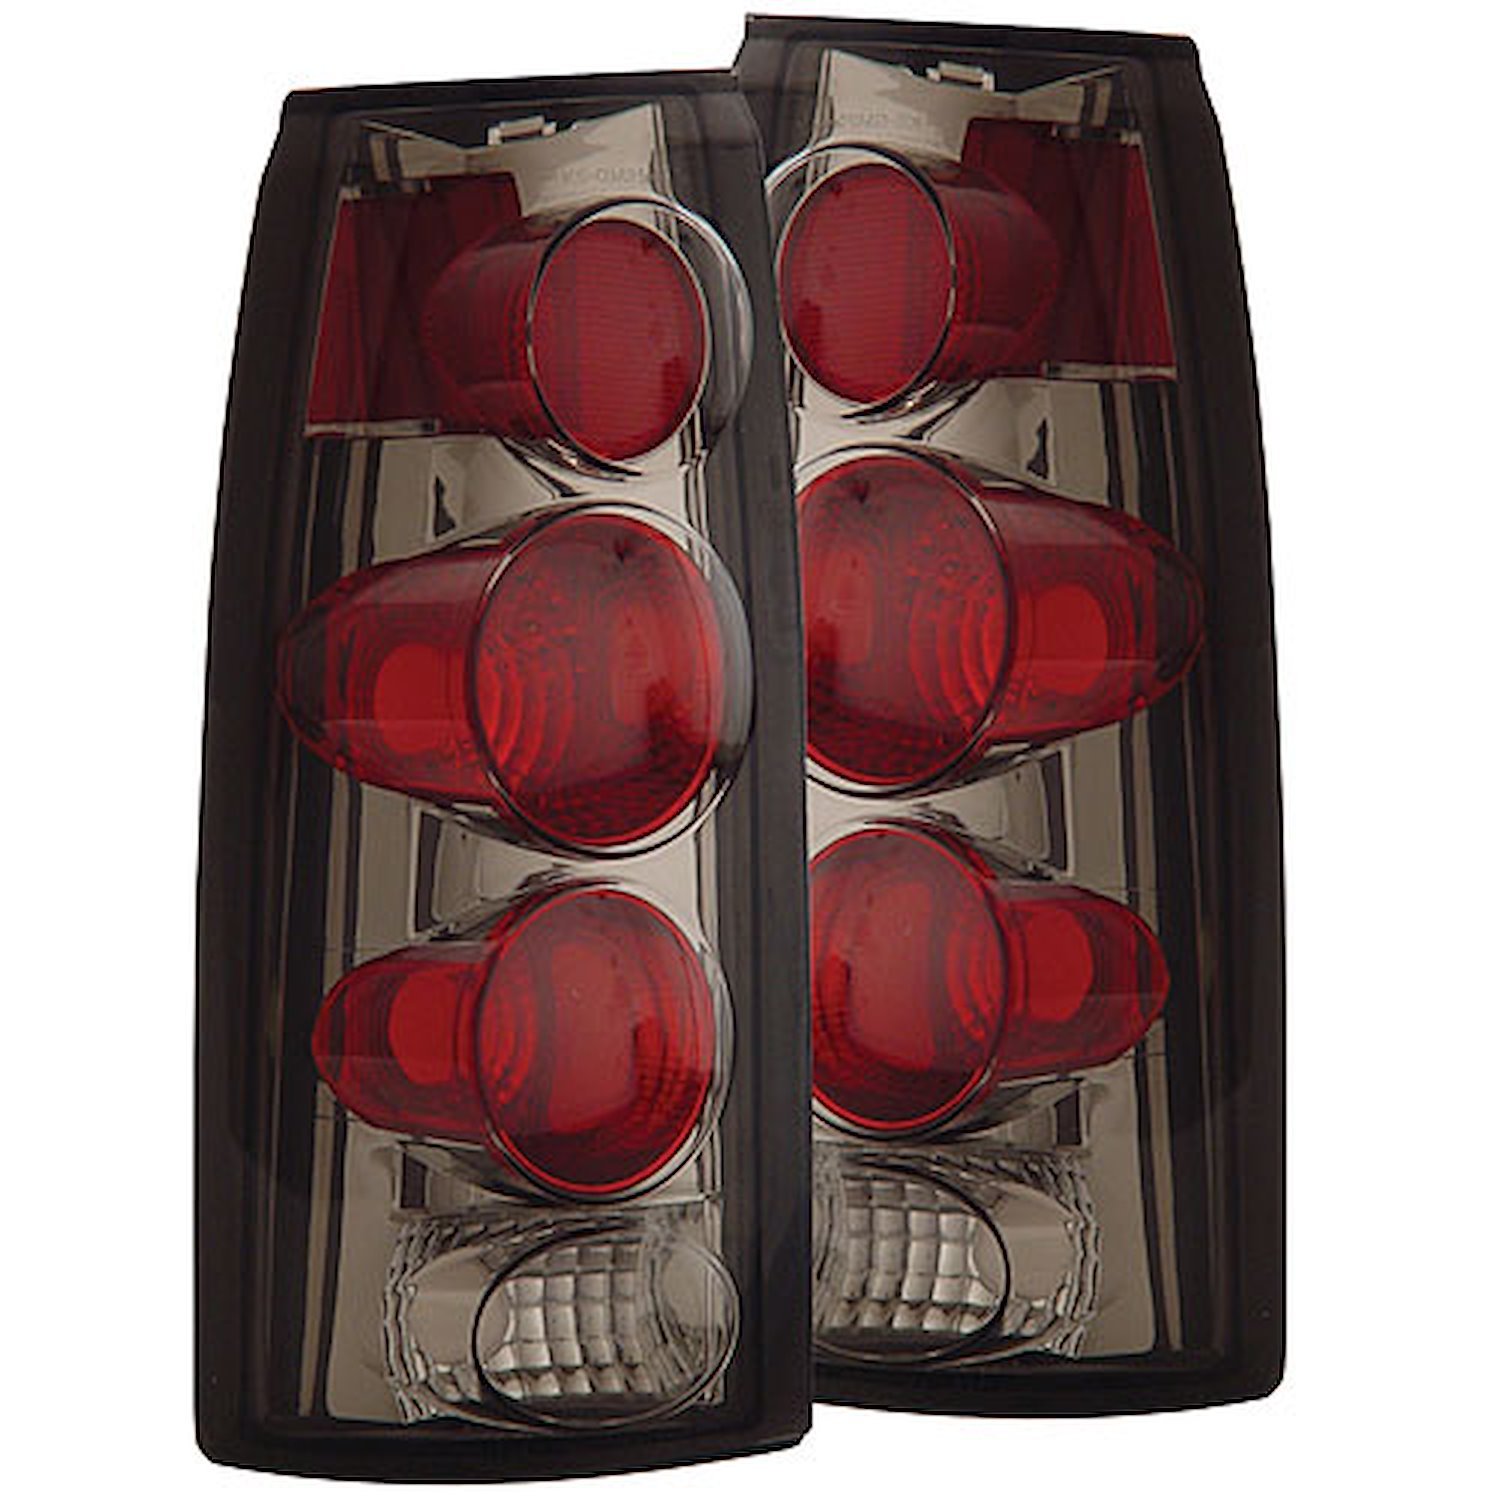 1988-1998 Chevy/CMC Full Size Truck/SUV Taillights